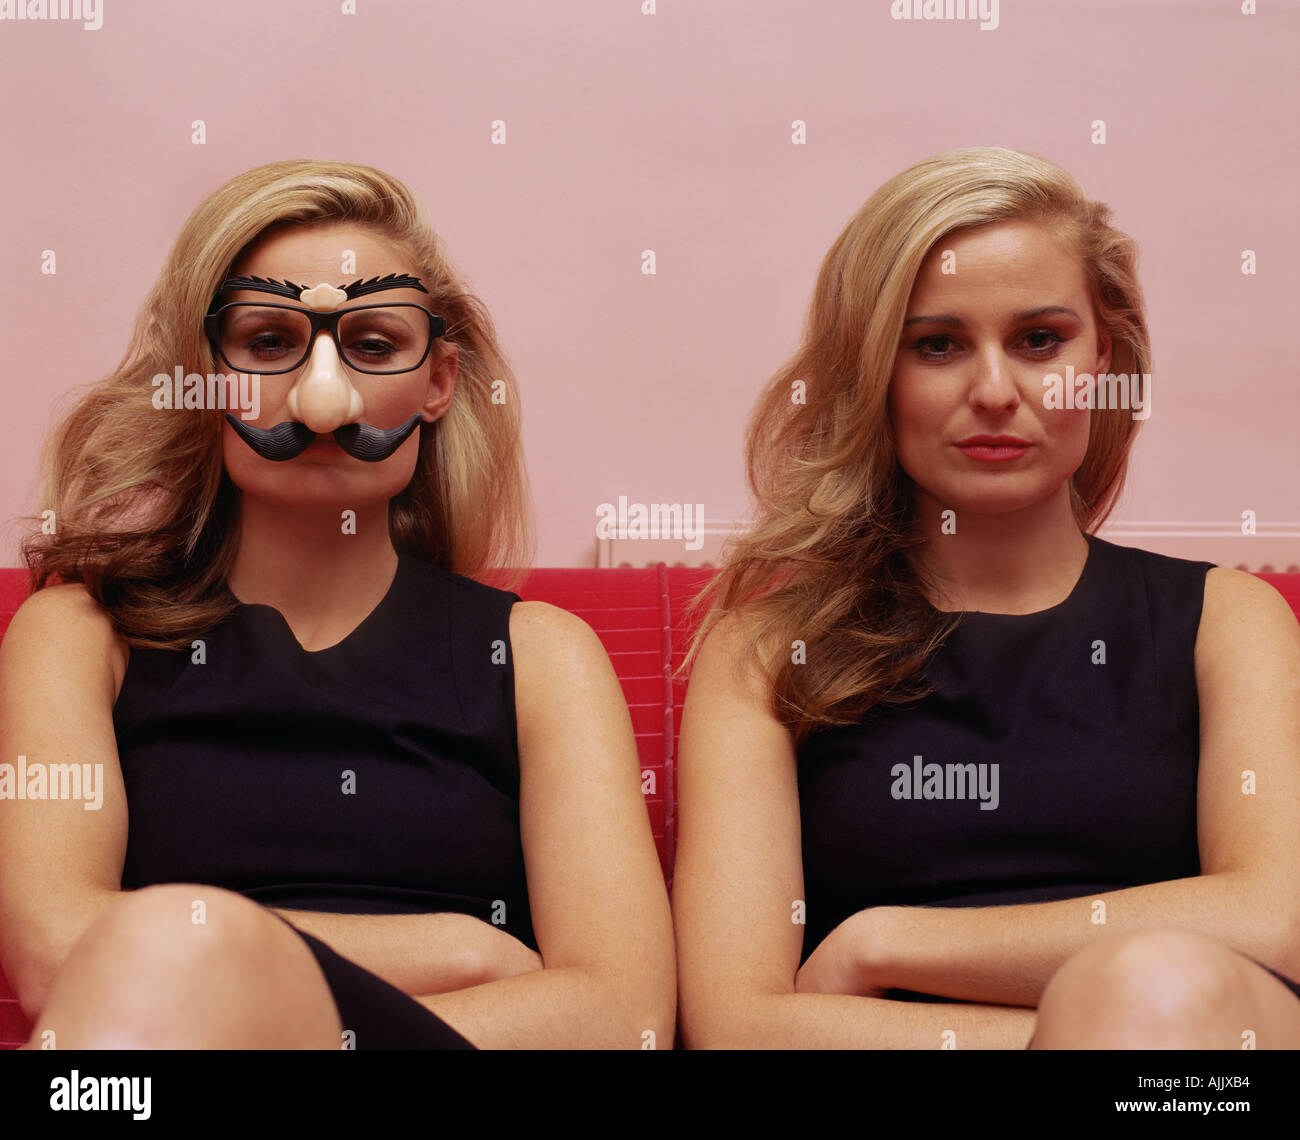 Two women one wearing a comedy disguise Stock Photo